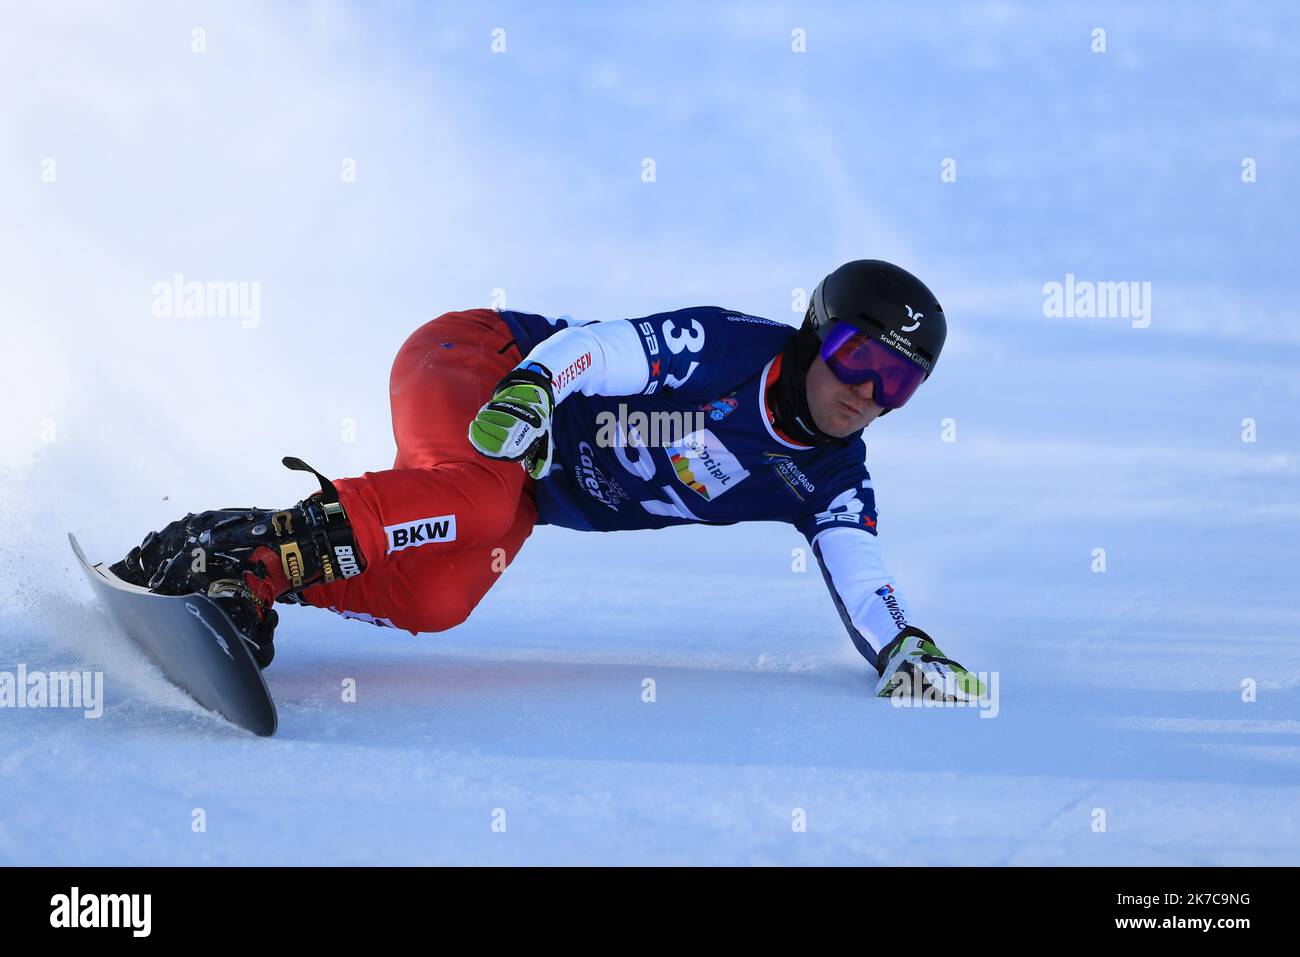 ©Pierre Teyssot/MAXPPP ; FIS Snowboard World Cup - Covid-19 Outbreak Parallel Slalom event on 17/12/2020 in Carezza, Italy. In action Nevin Galmarini (SUI) . Pierre Teyssot / Maxppp  Stock Photo